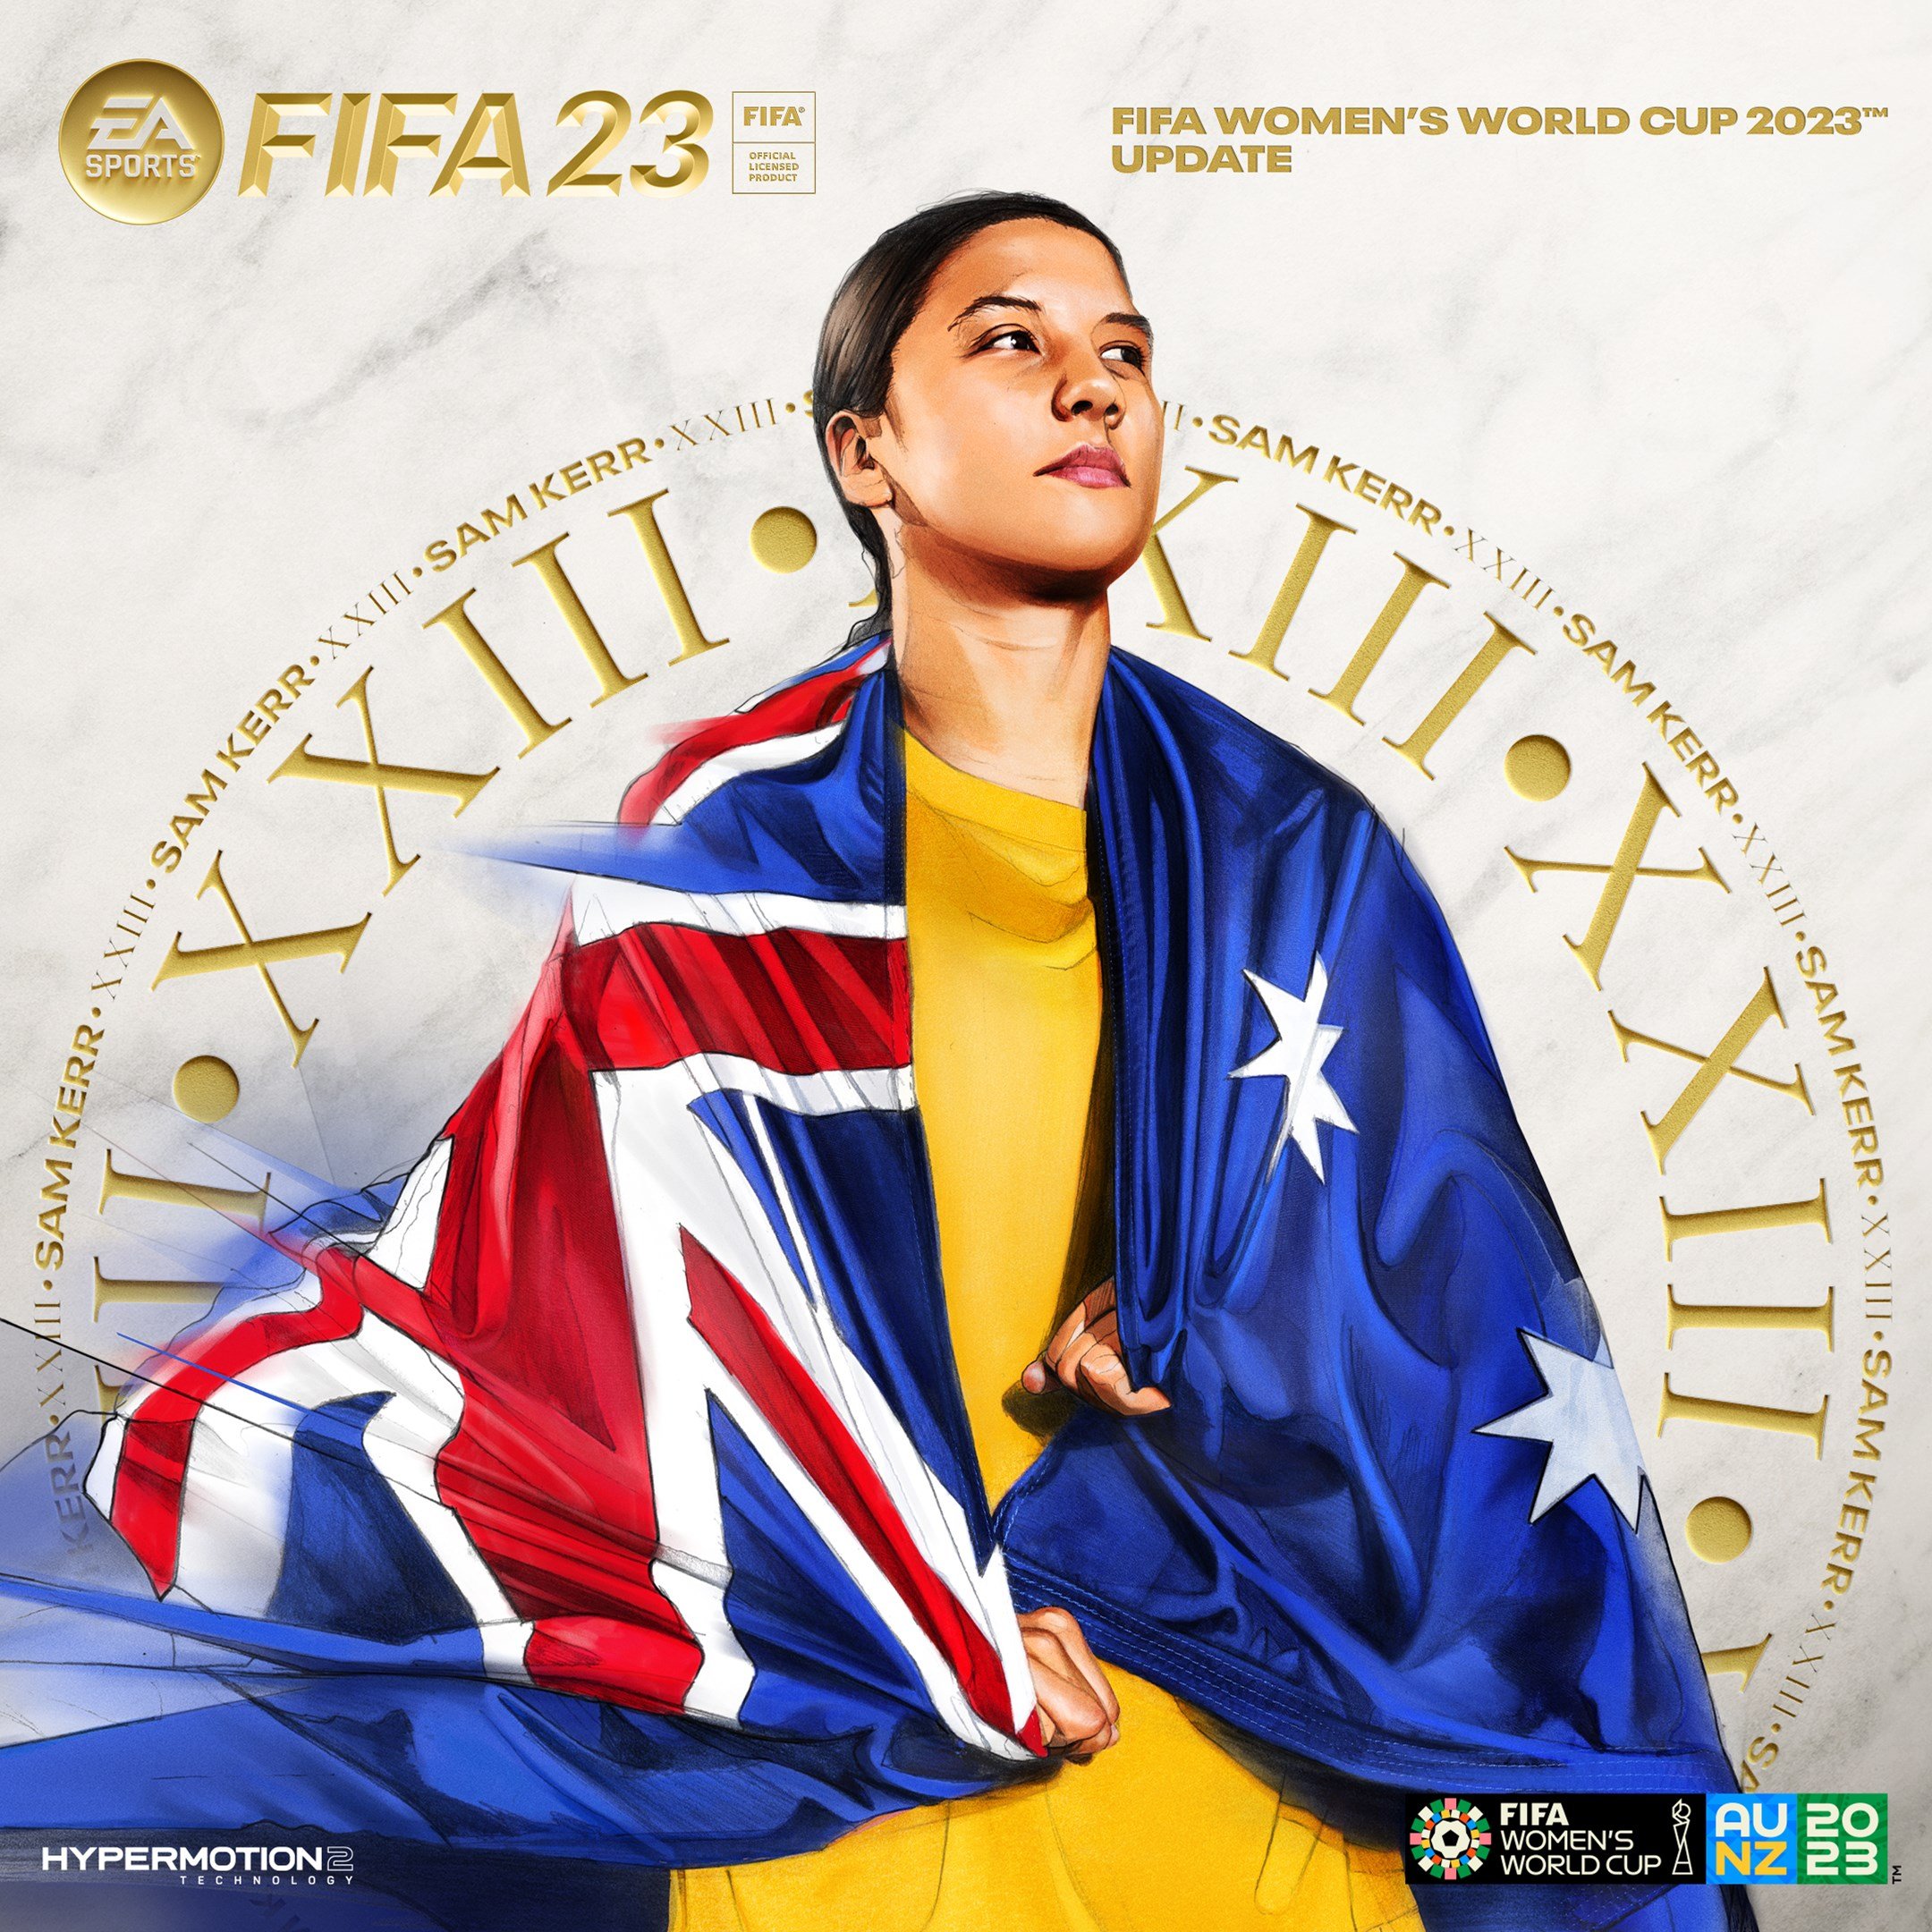 Boxart for FIFA 23 [XBSX]